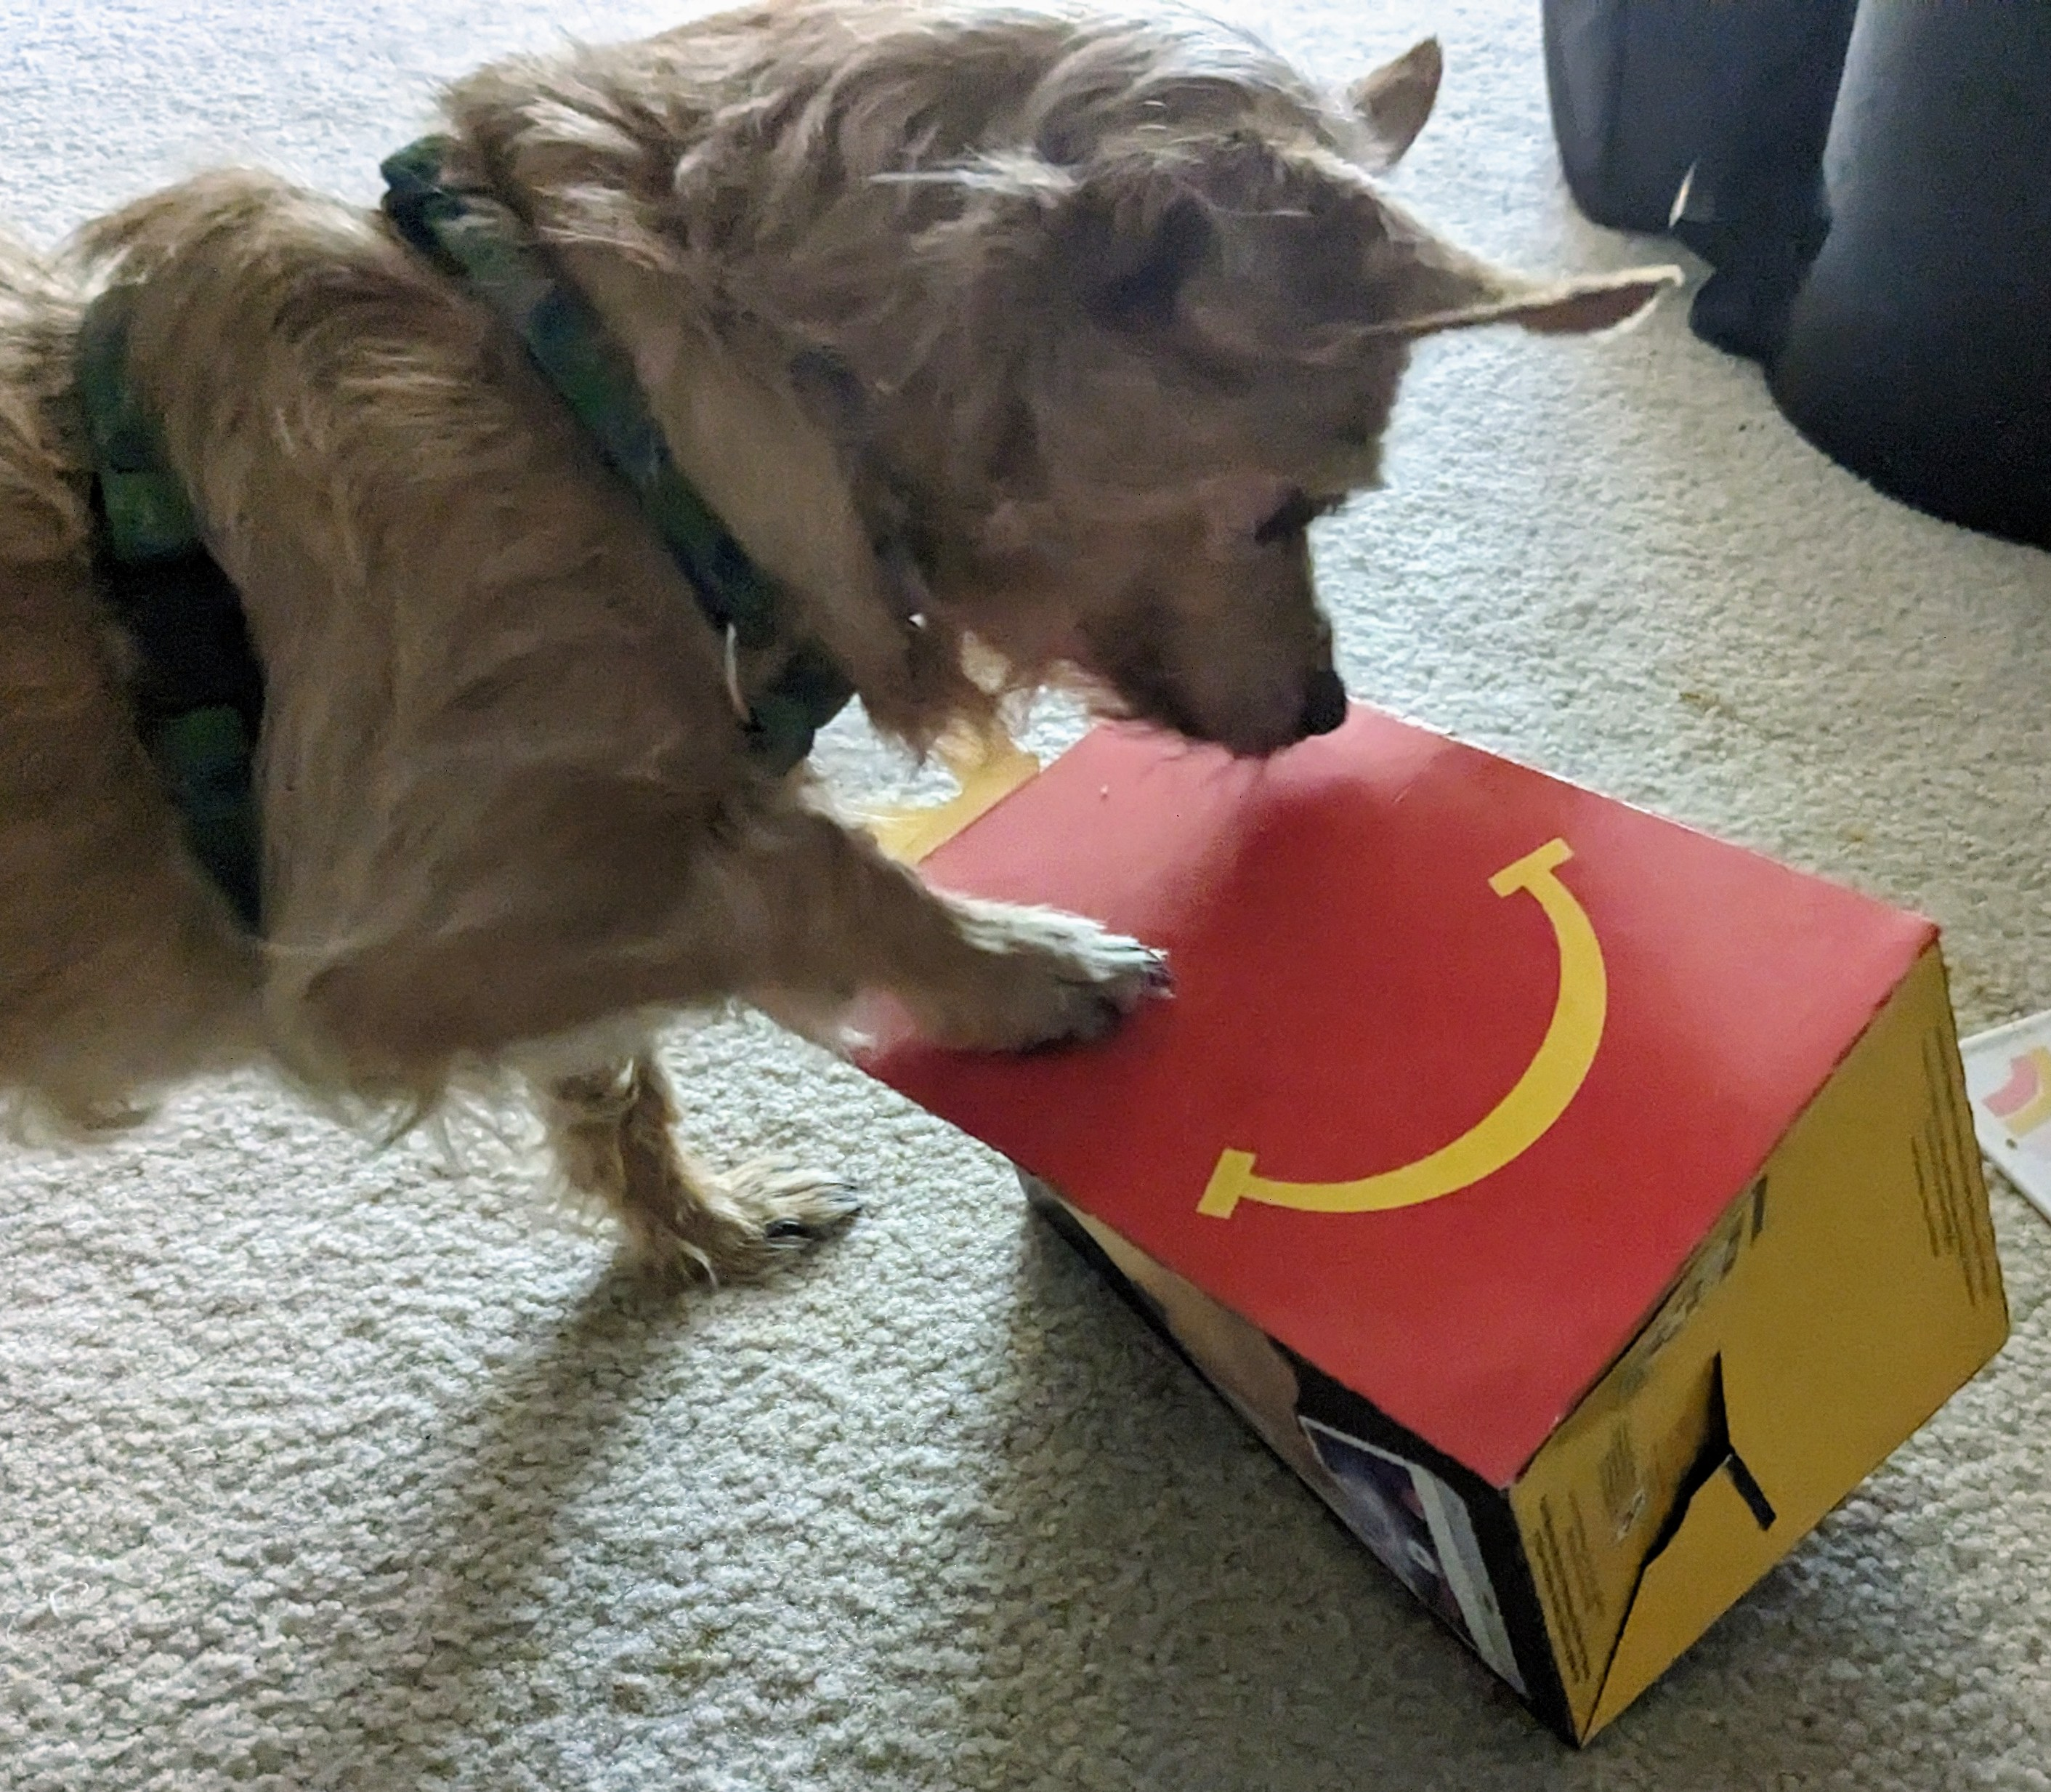 a small brown dog pawing at a fast food takeout box